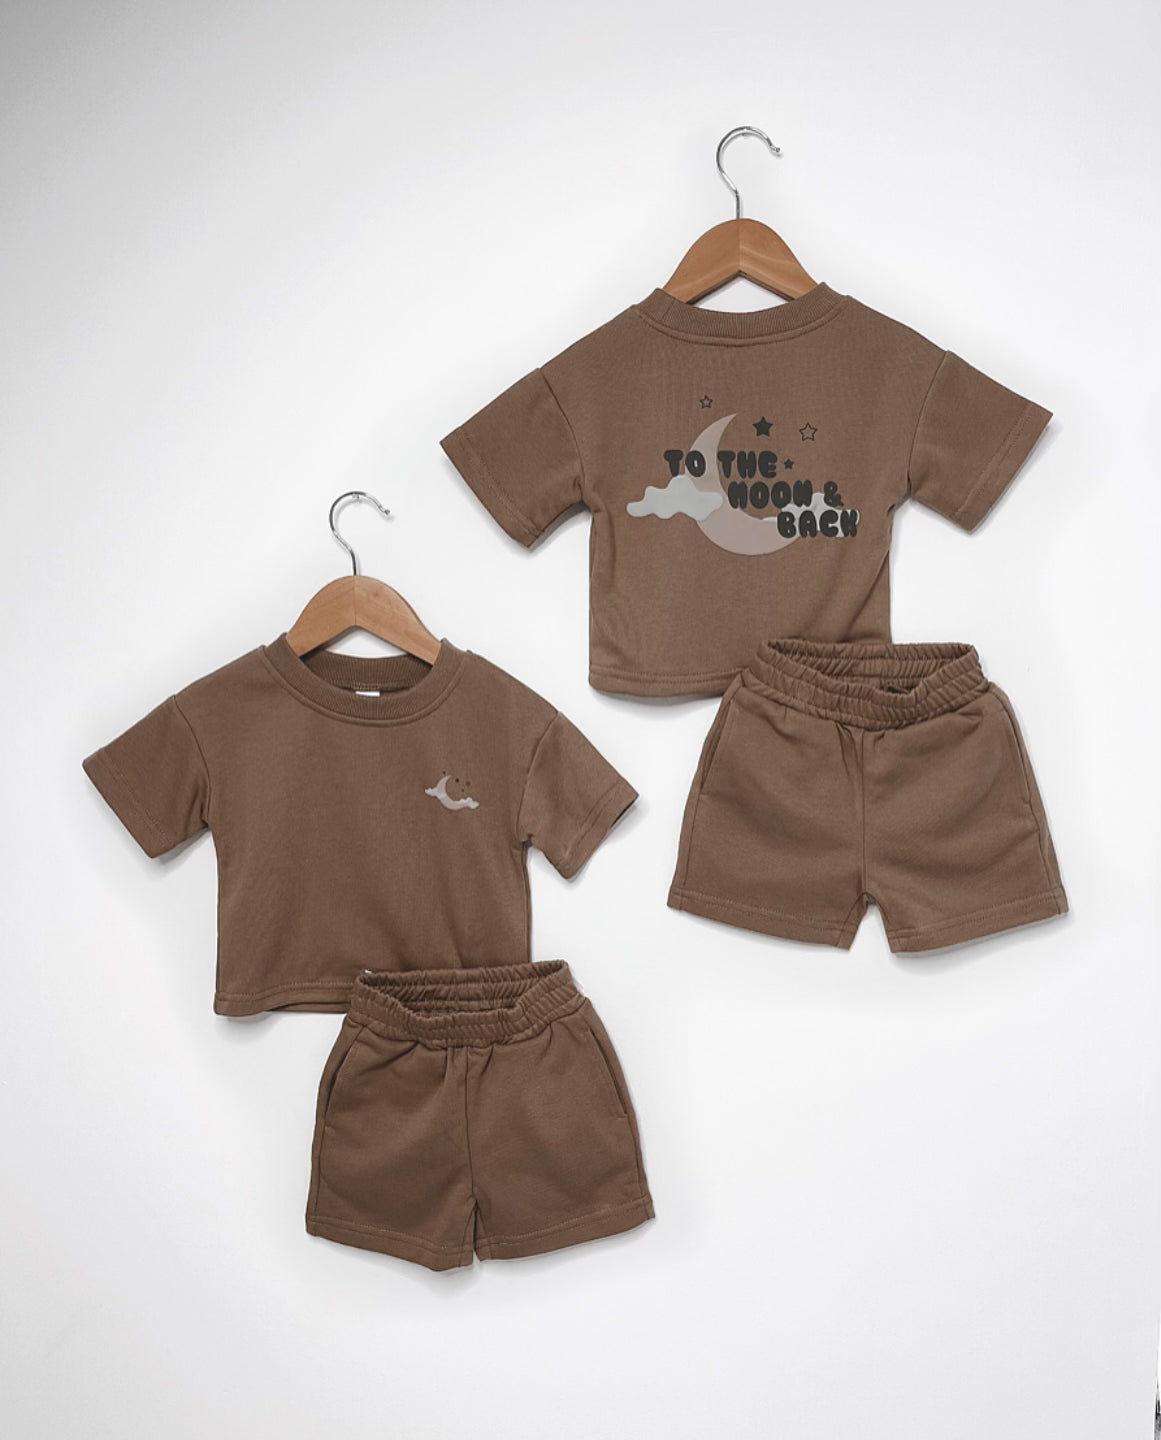 MLBC French Terry Choc Brown T-Shirt and Shorts Set - To the moon